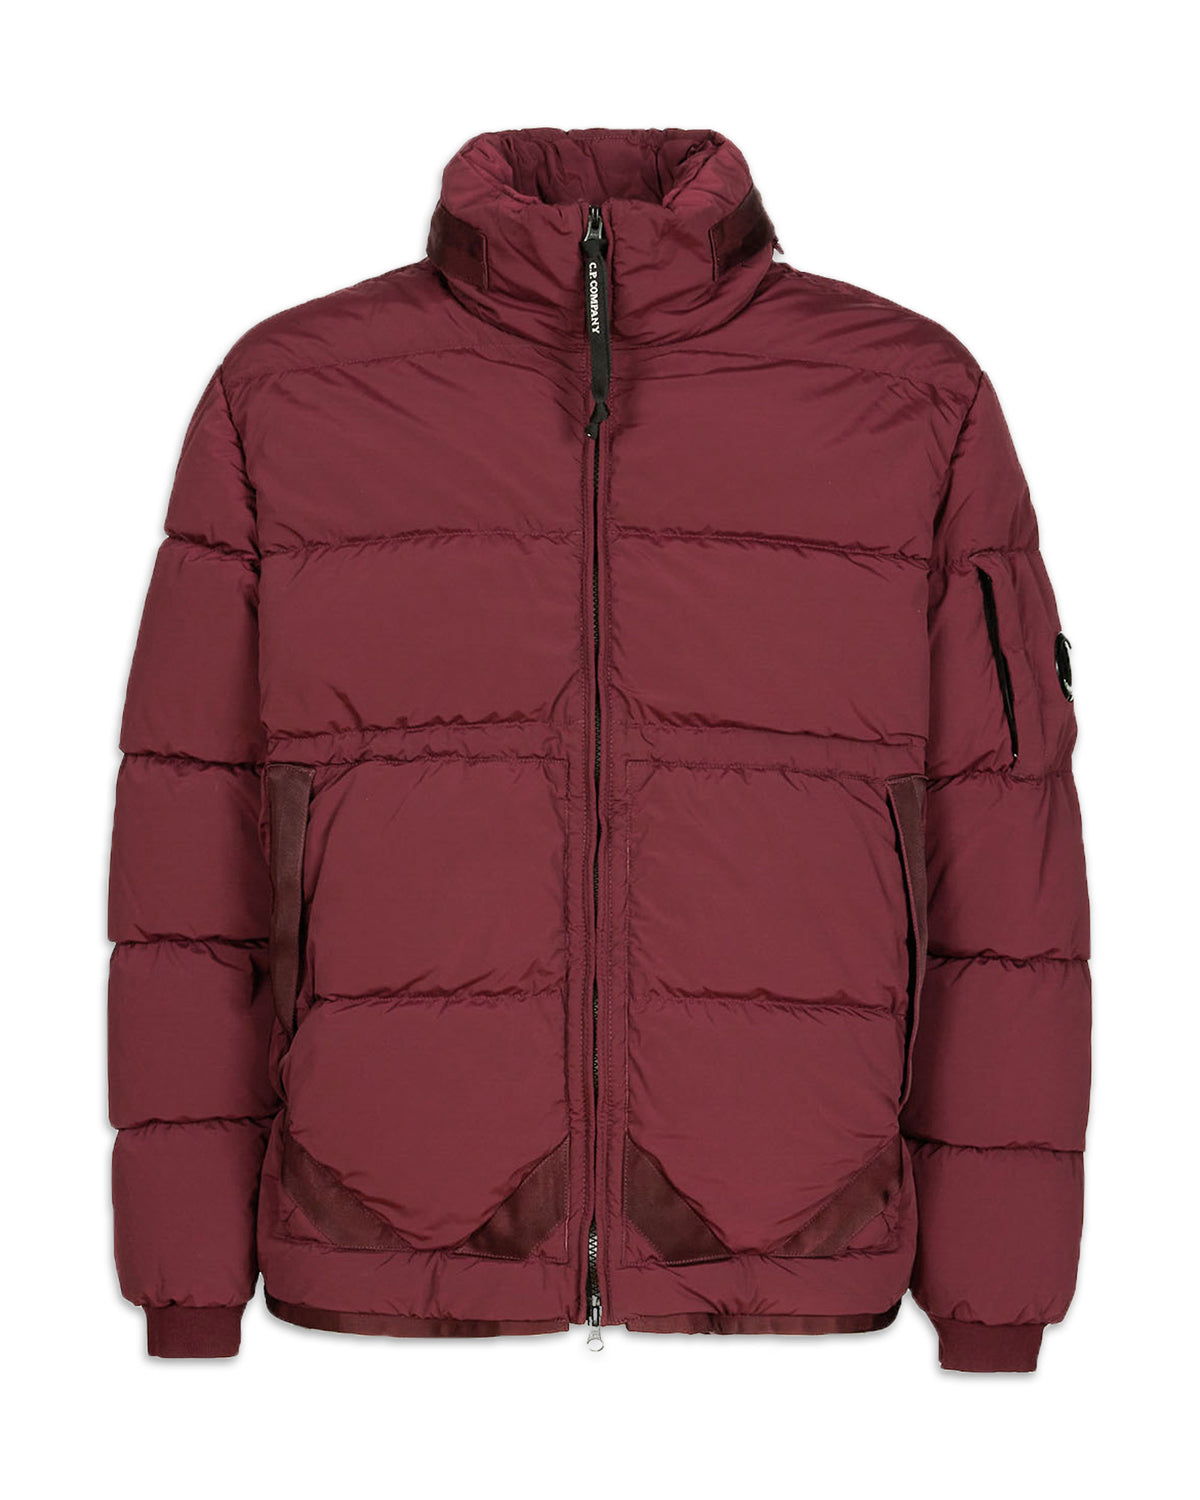 CP Company Outerwear Medium Jacket in Nycra R Port Royal